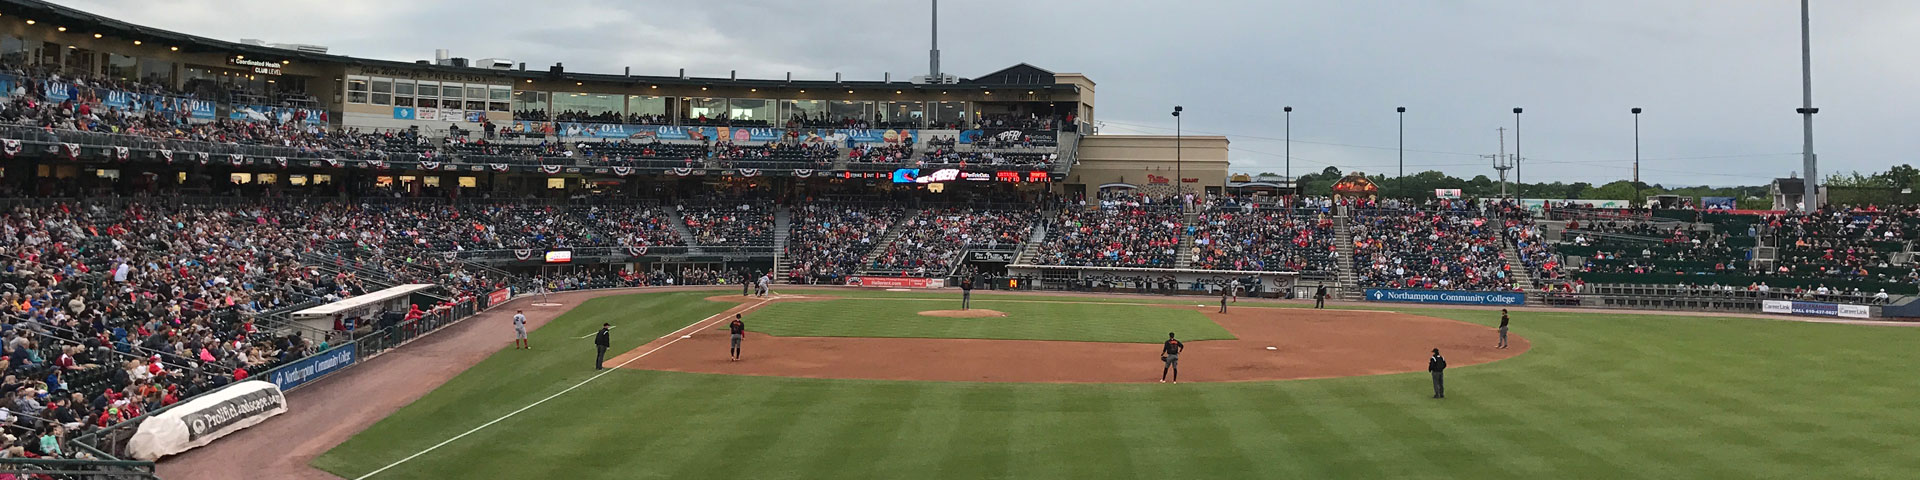 A view of a baseball game from right field.